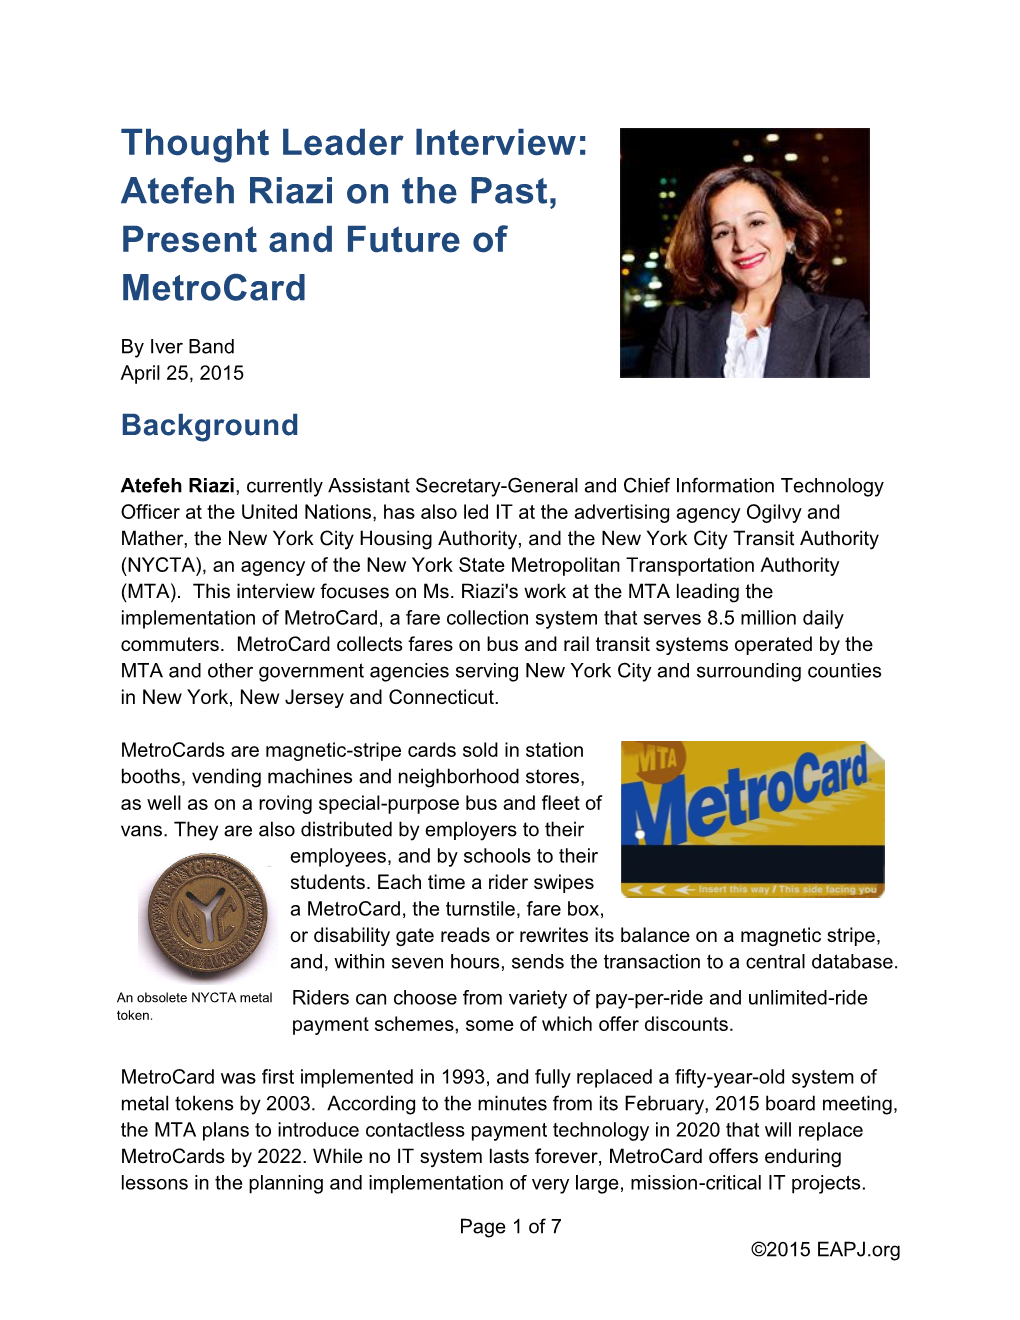 Thought Leader Interview: Atefeh Riazi on the Past, Present and Future of Metrocard